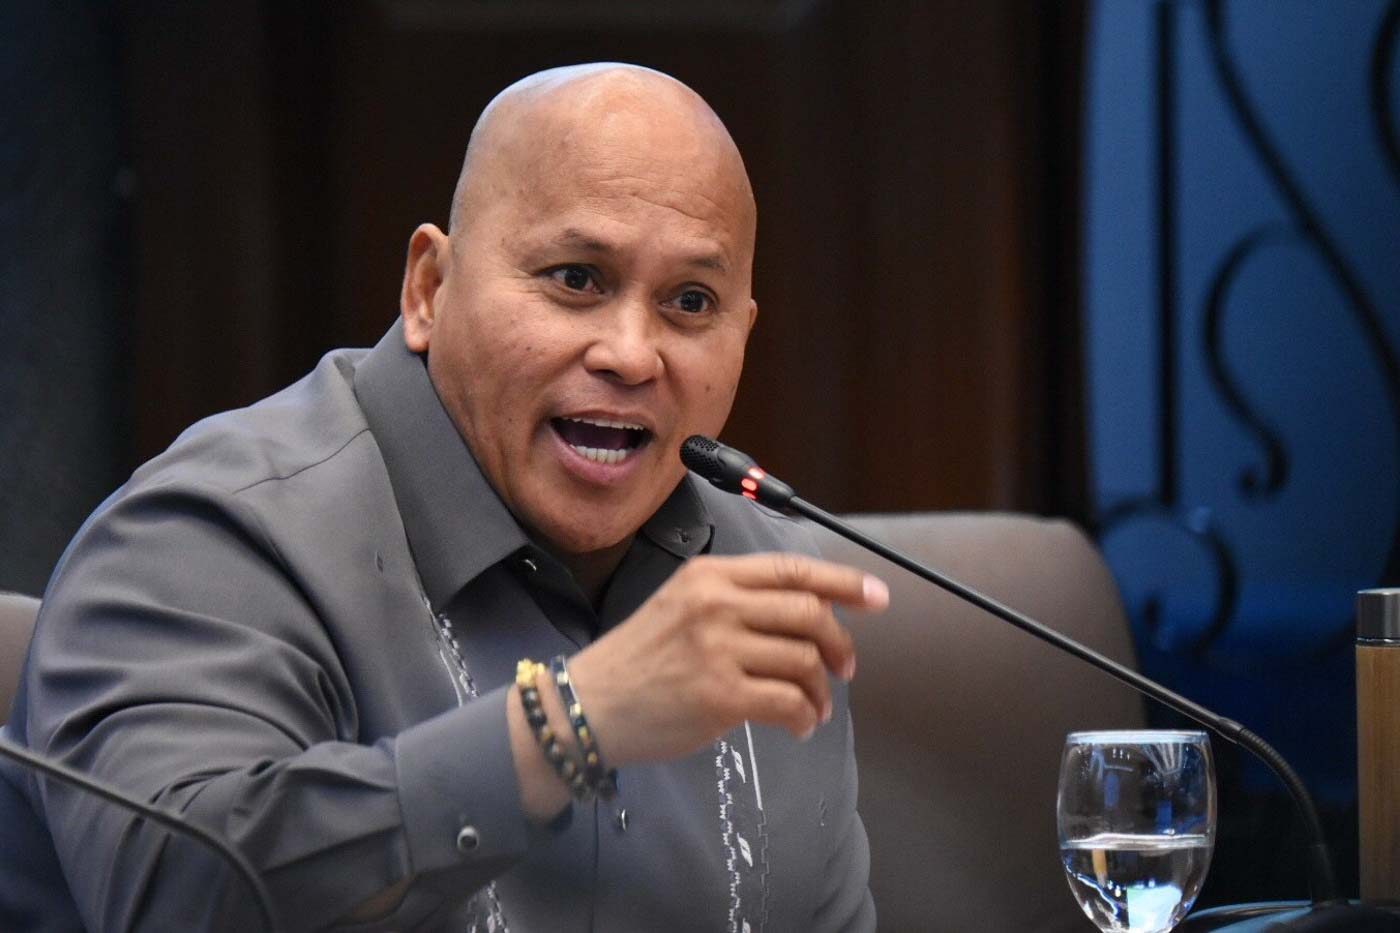 Dela Rosa says no word yet from U.S. on supposed visa cancellation